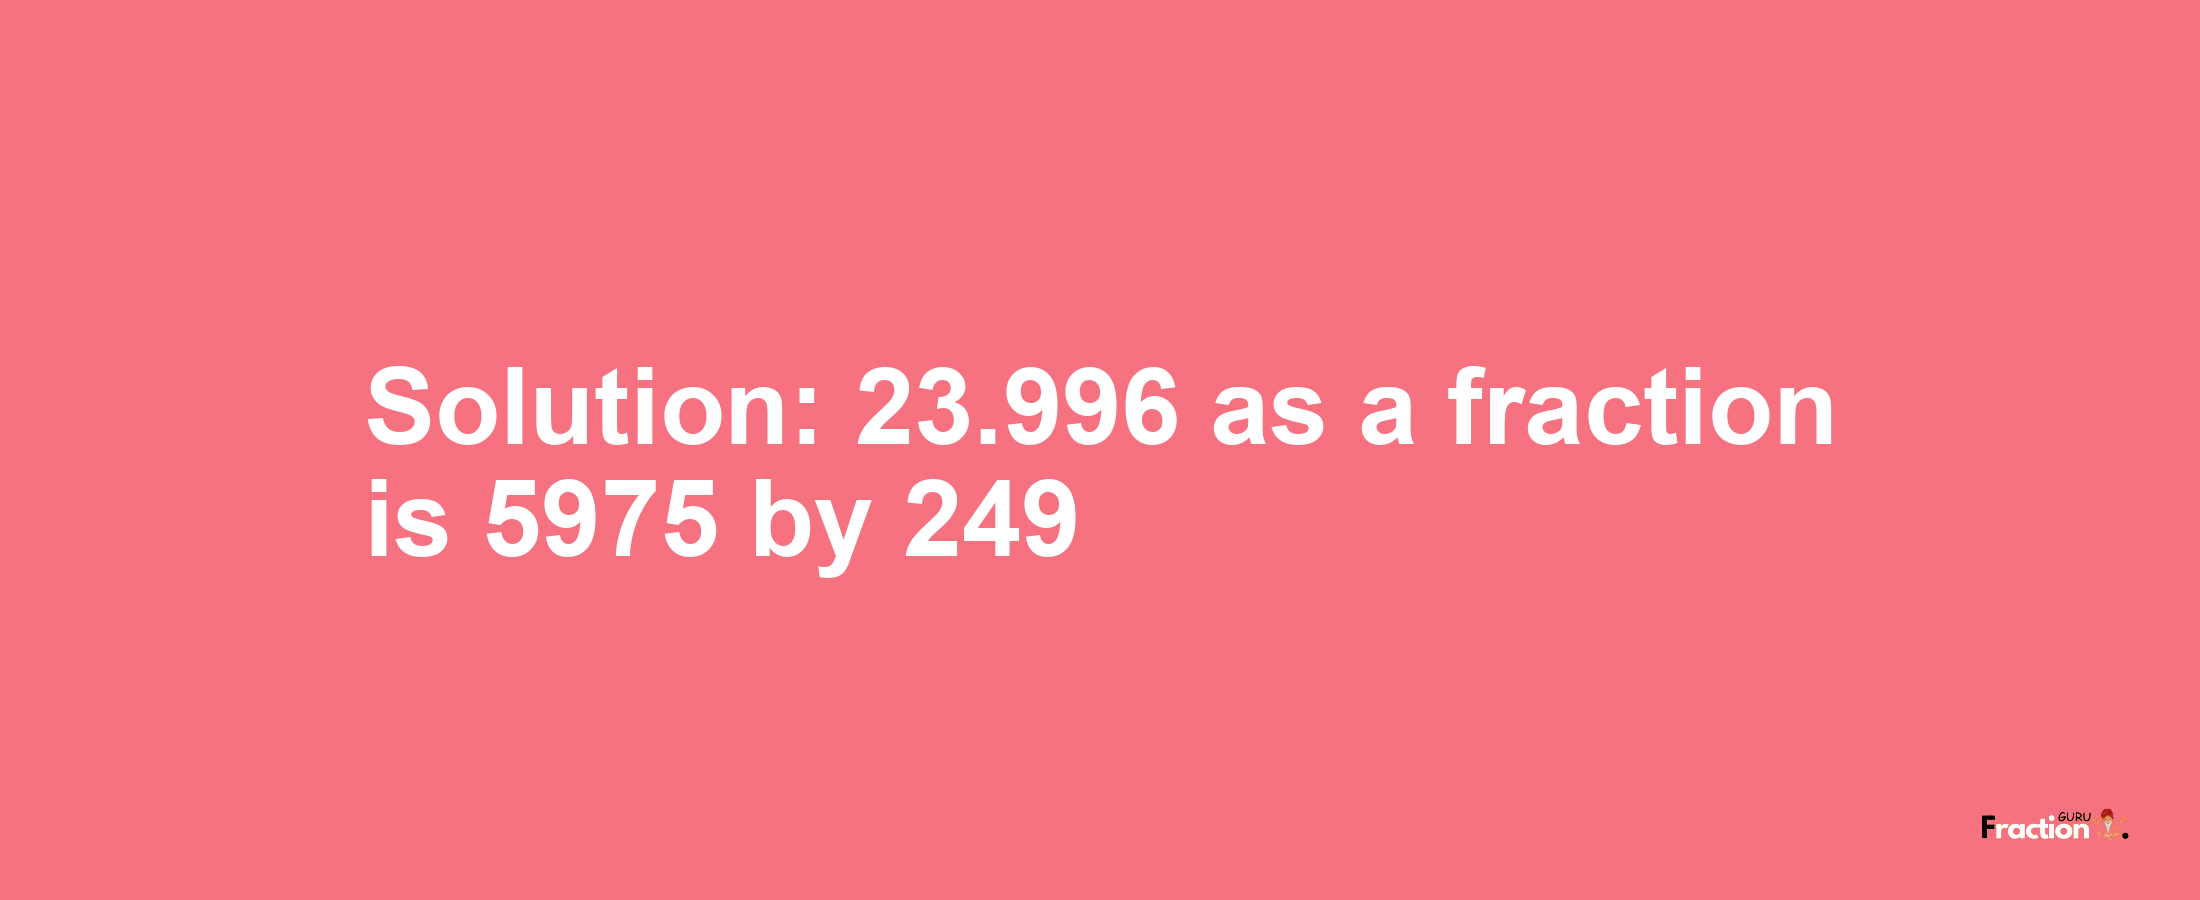 Solution:23.996 as a fraction is 5975/249